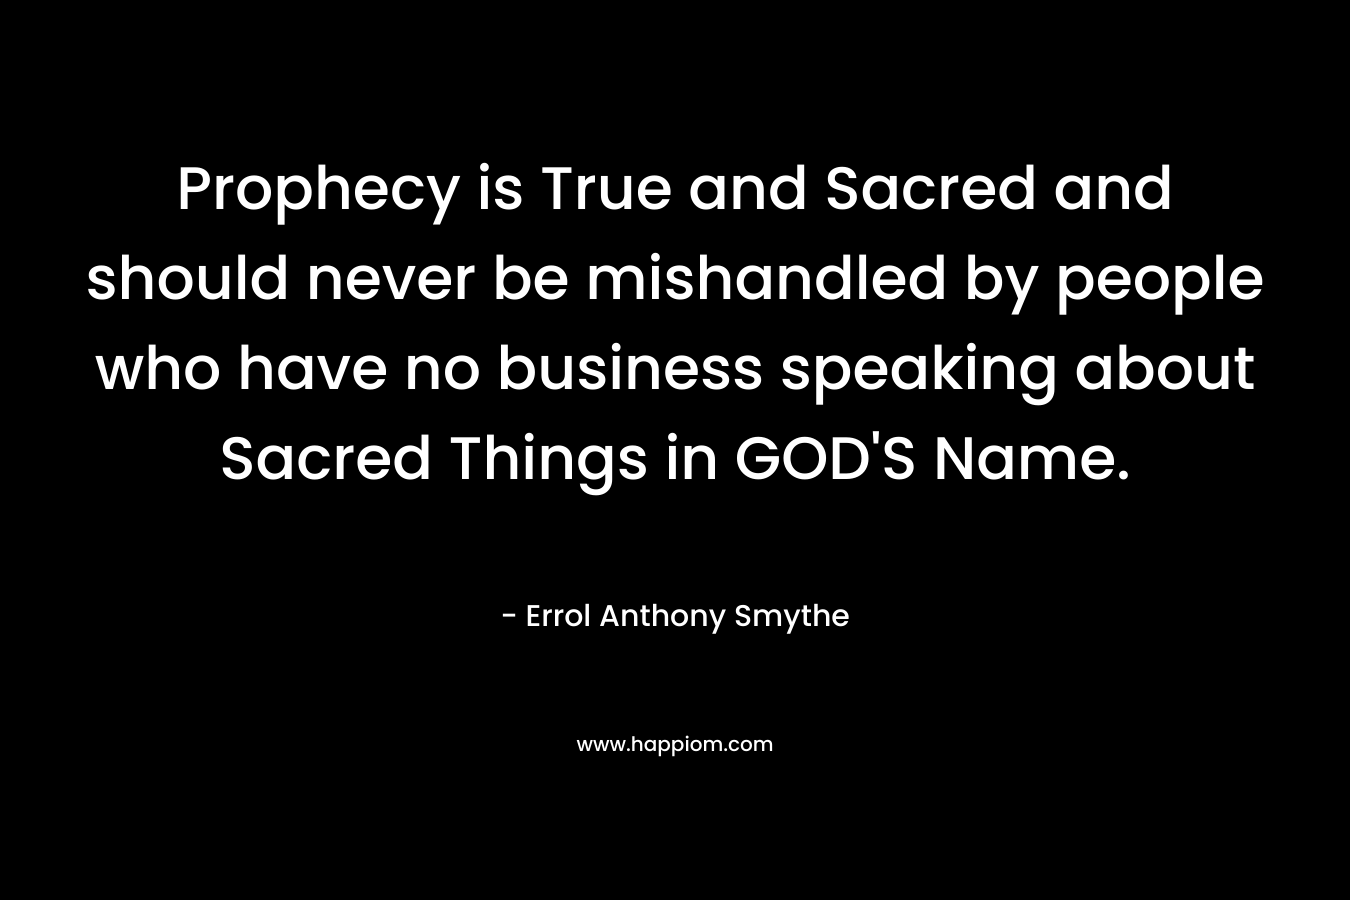 Prophecy is True and Sacred and should never be mishandled by people who have no business speaking about Sacred Things in GOD'S Name.